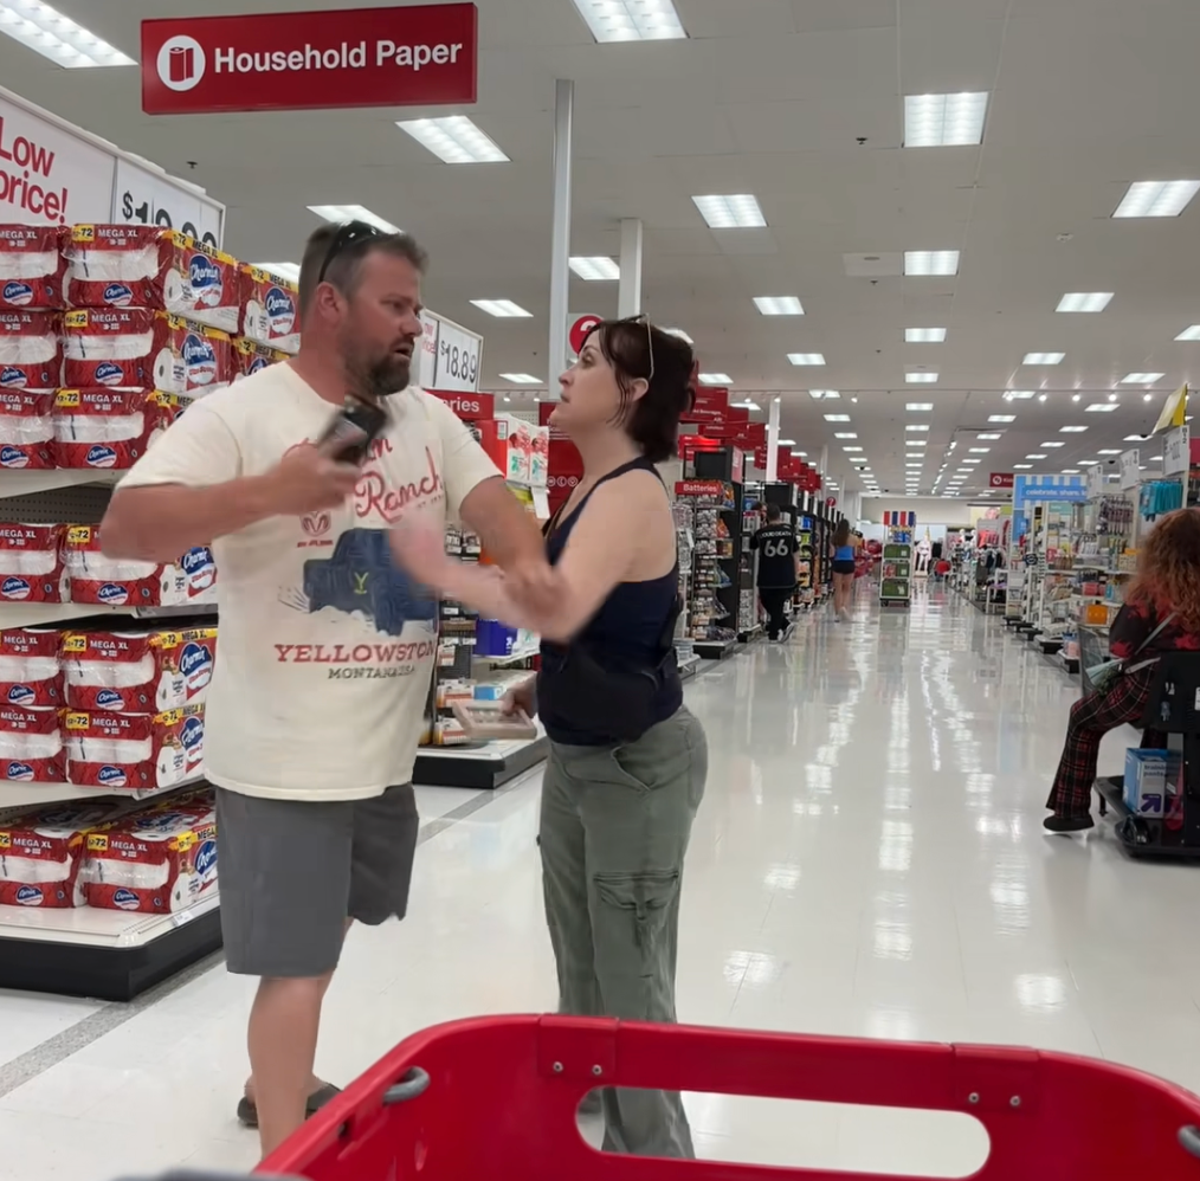 Mom catches sex offender filming her teenage daughter in a Target. But cops won’t do anything about it